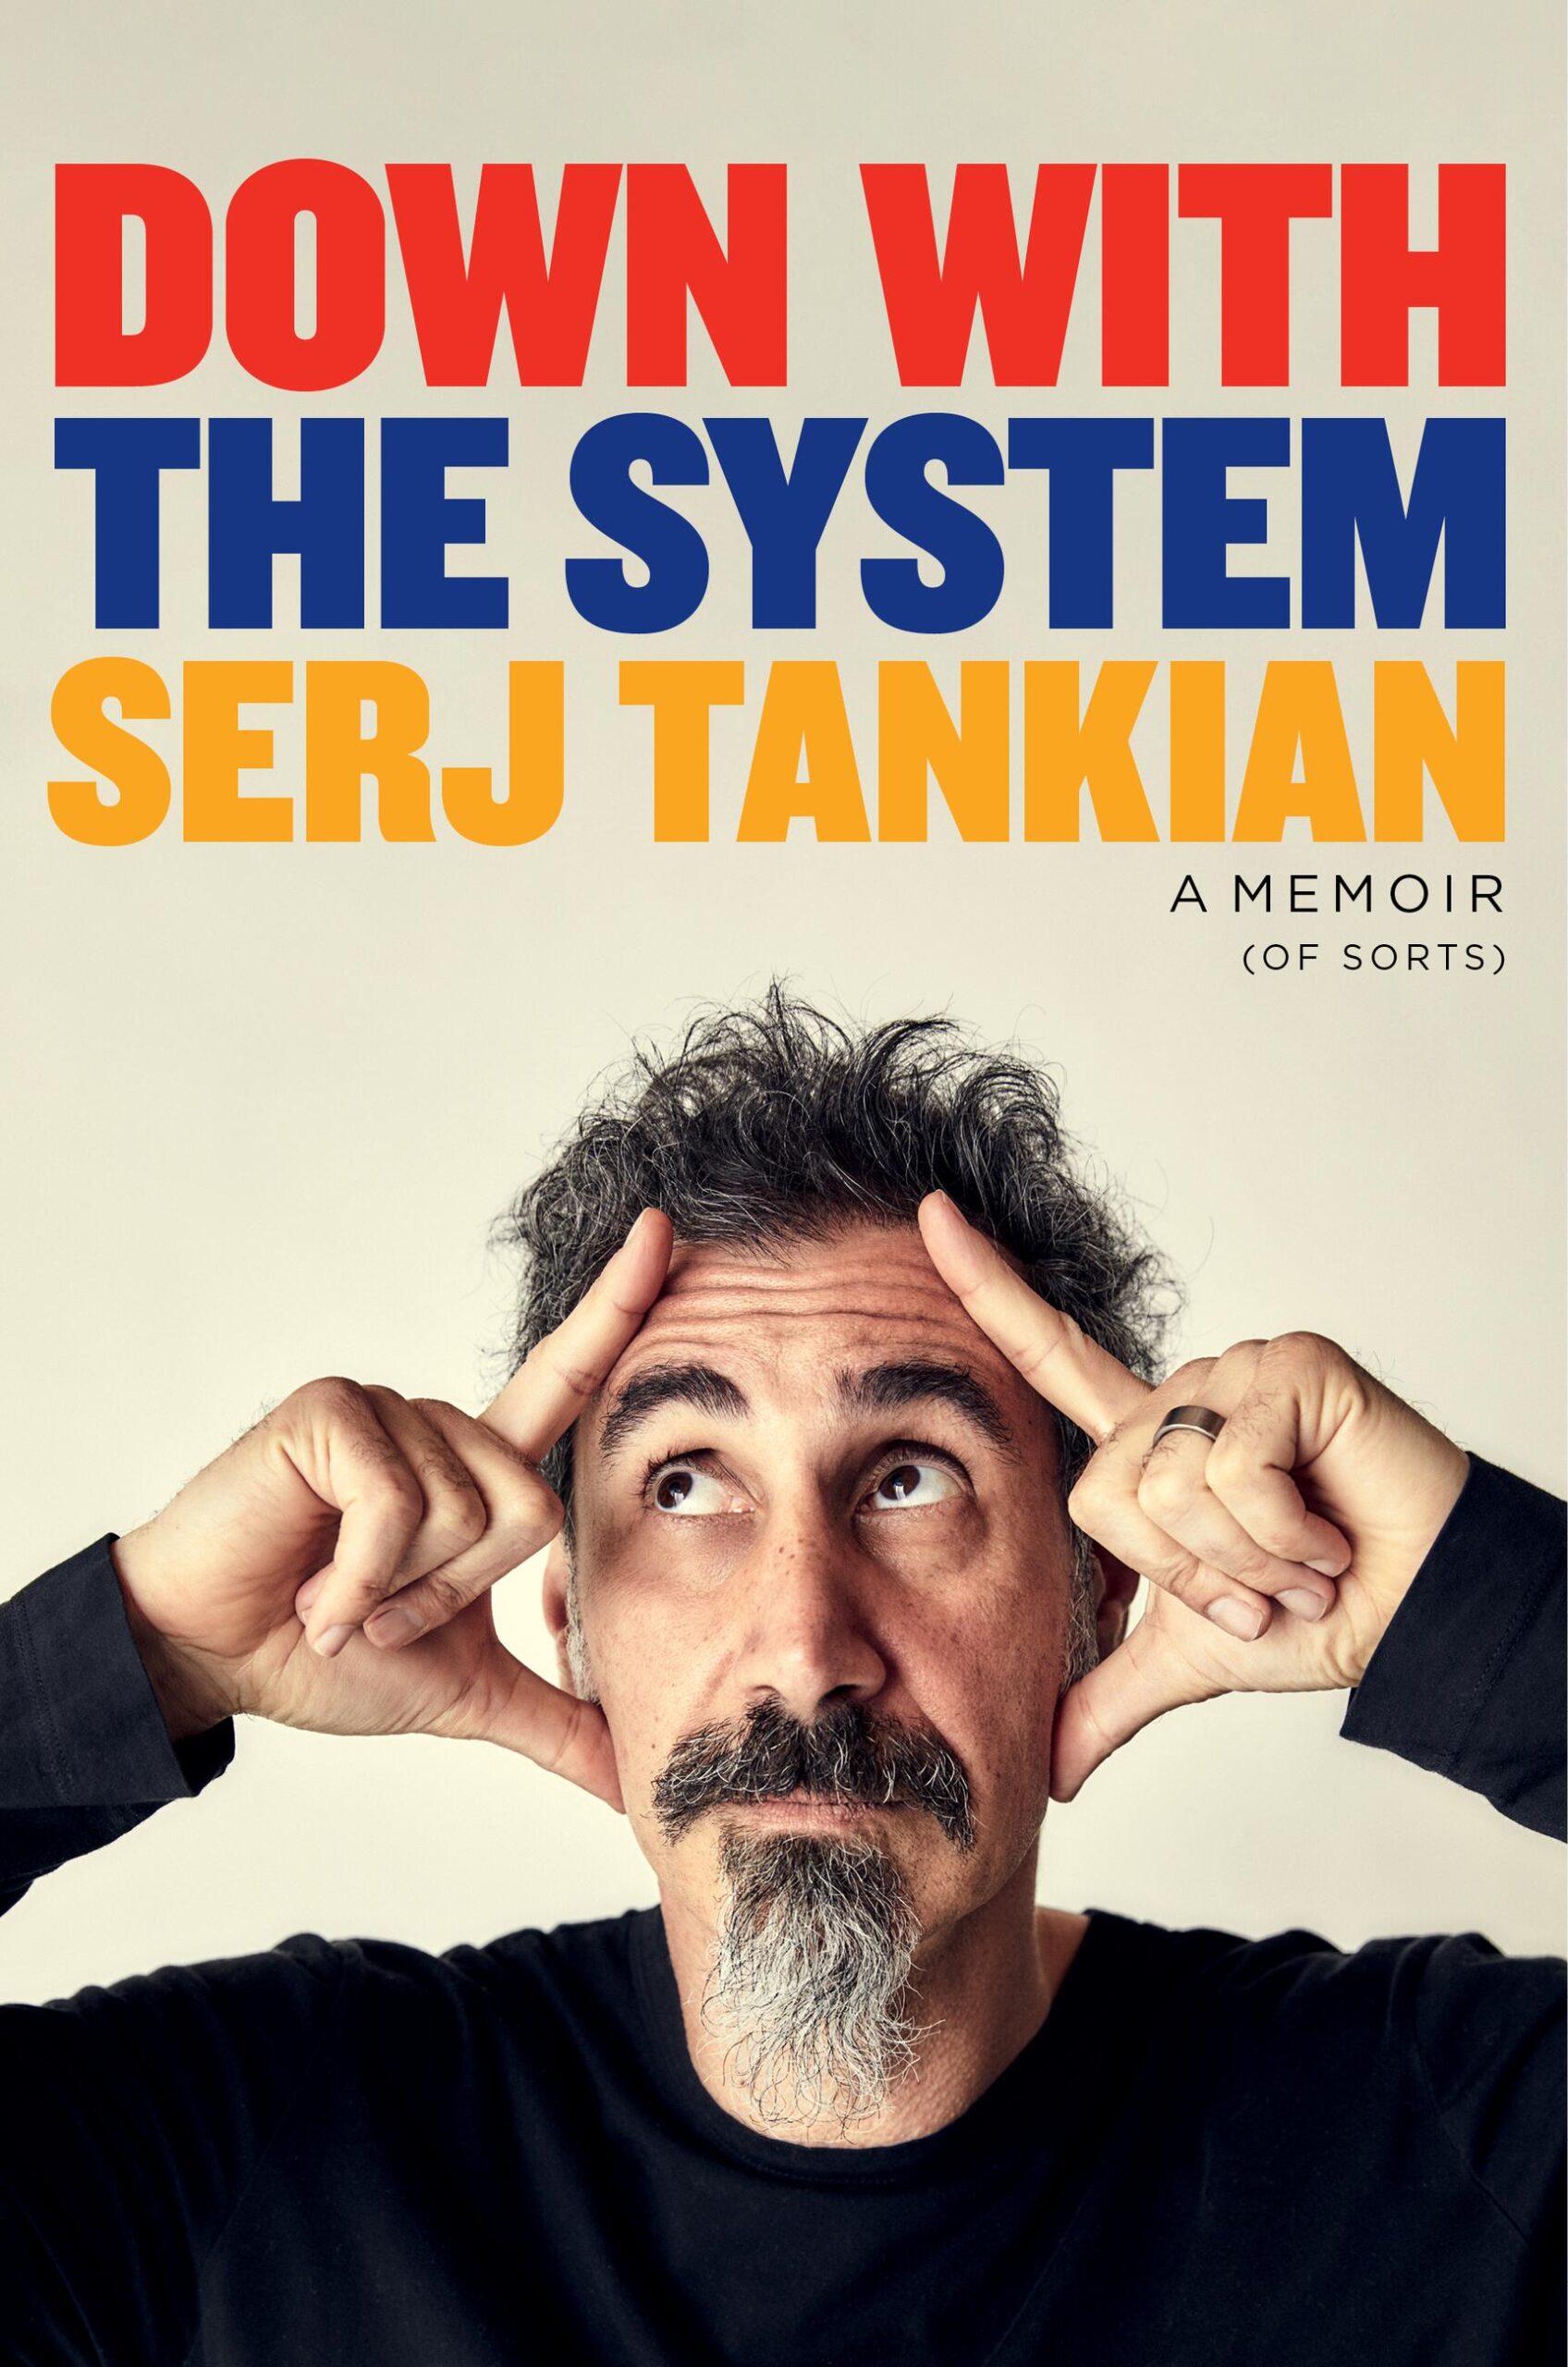 Book Launch: Down with the System by Serj Tankian